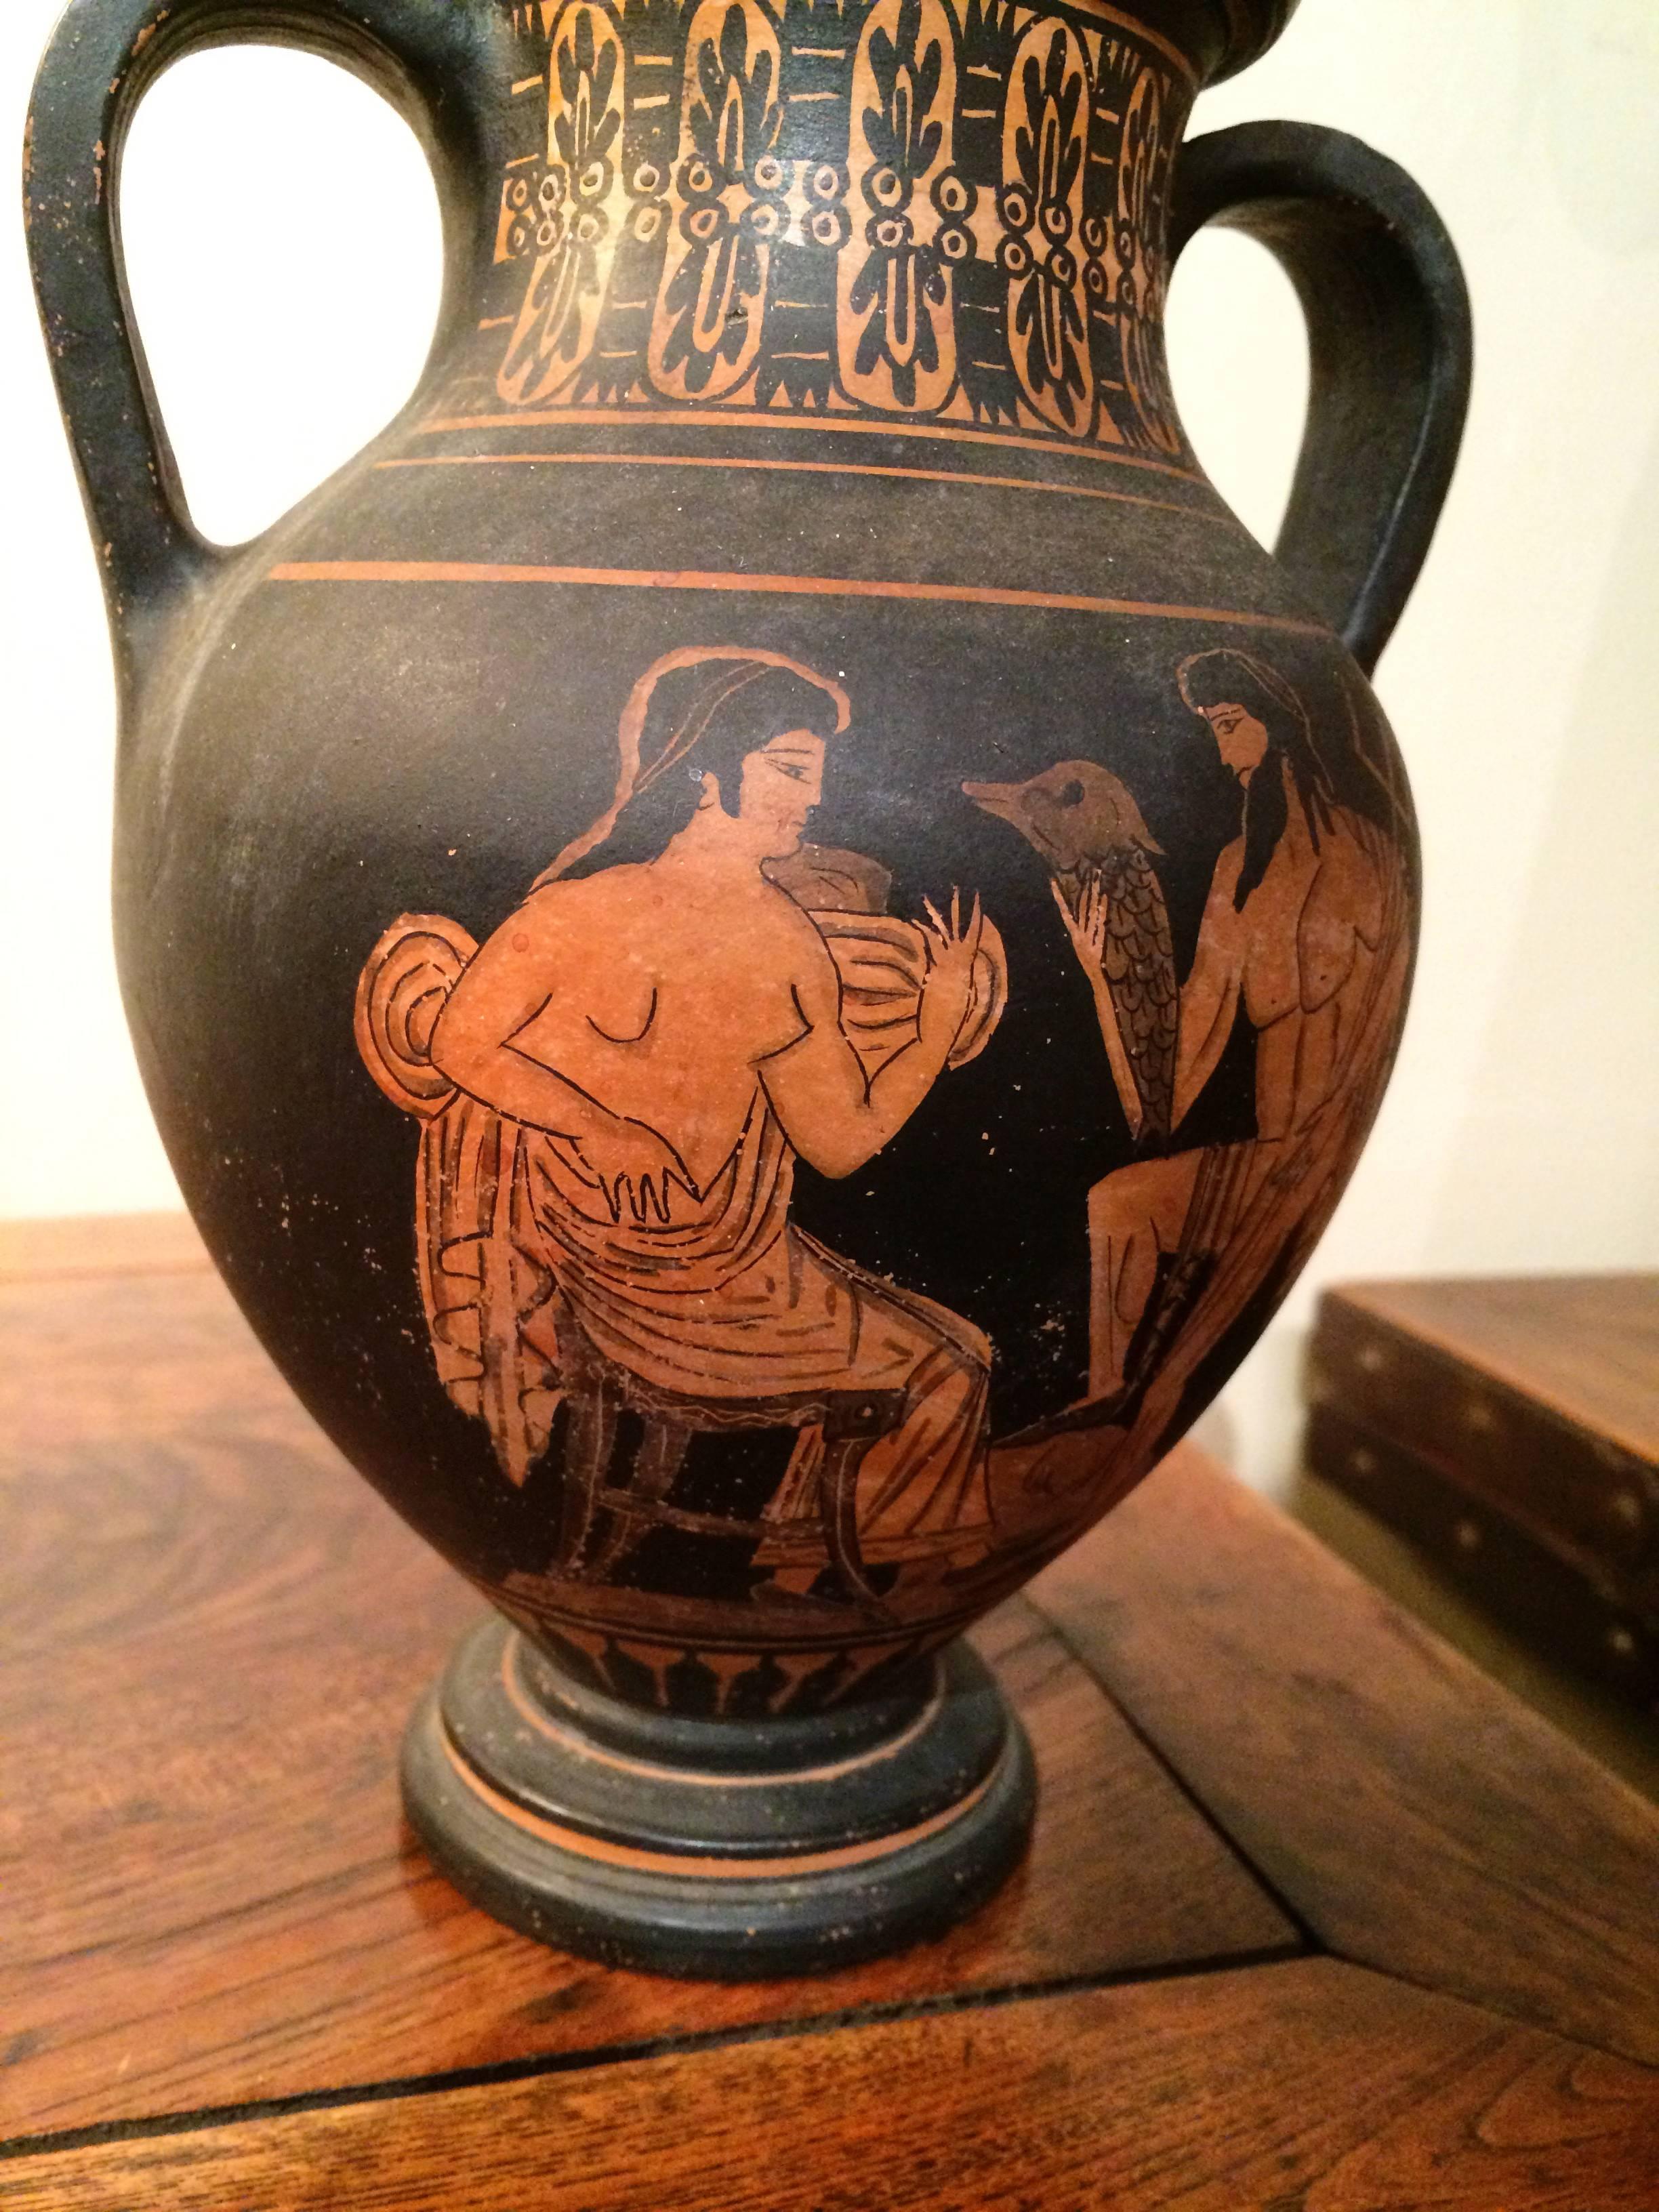 Classical Greek two handled vase in the ancient style depicting a mythological scene with Neptune presenting a porpoise to a seated woman or goddess. 